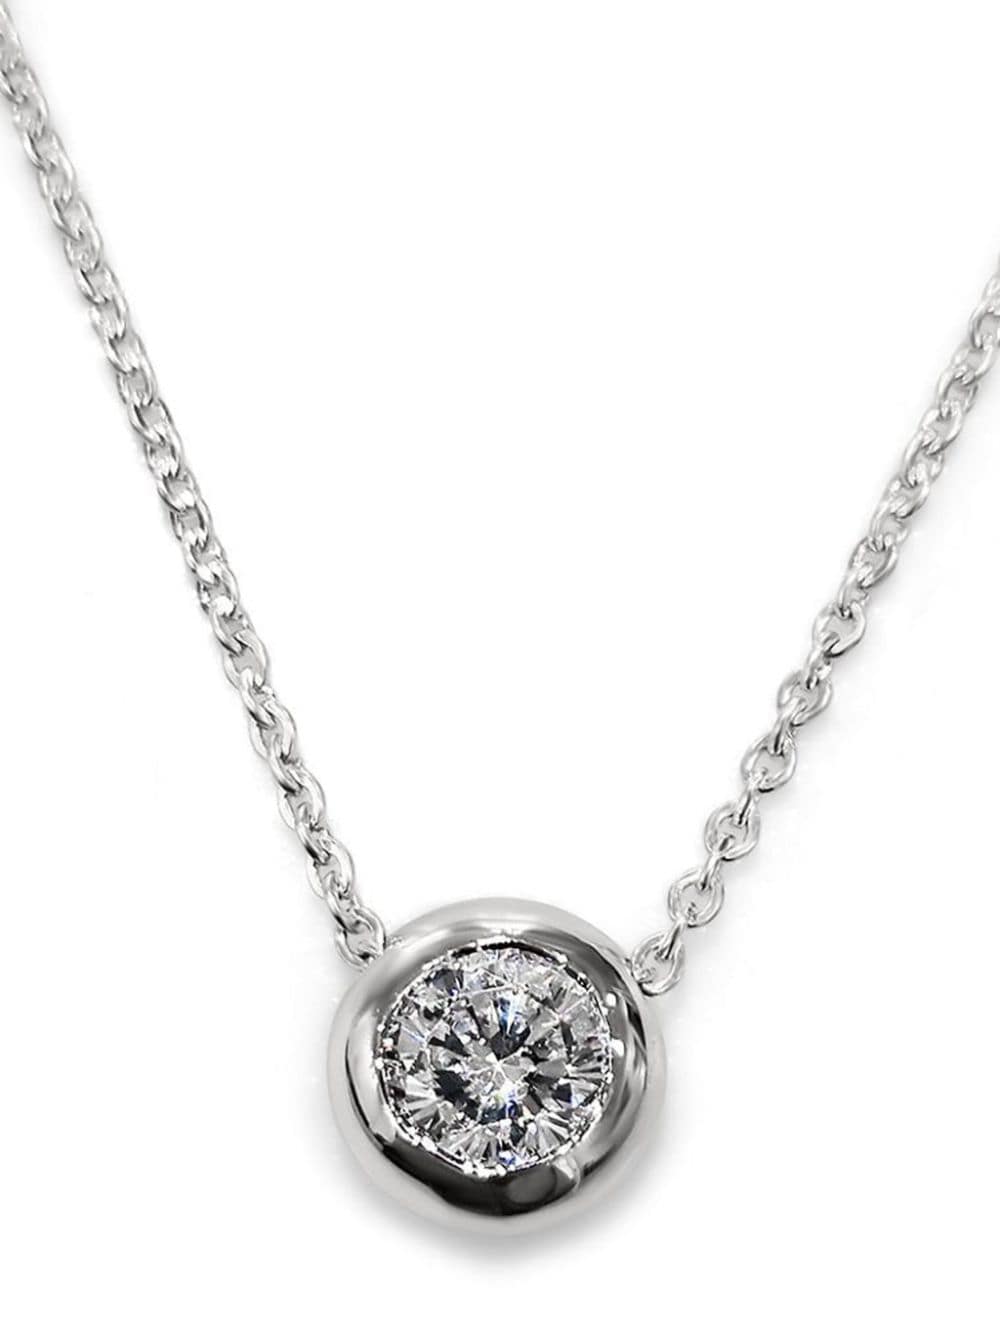 Fantasia By Deserio Bezel Set Round Pendant Necklace In 白色